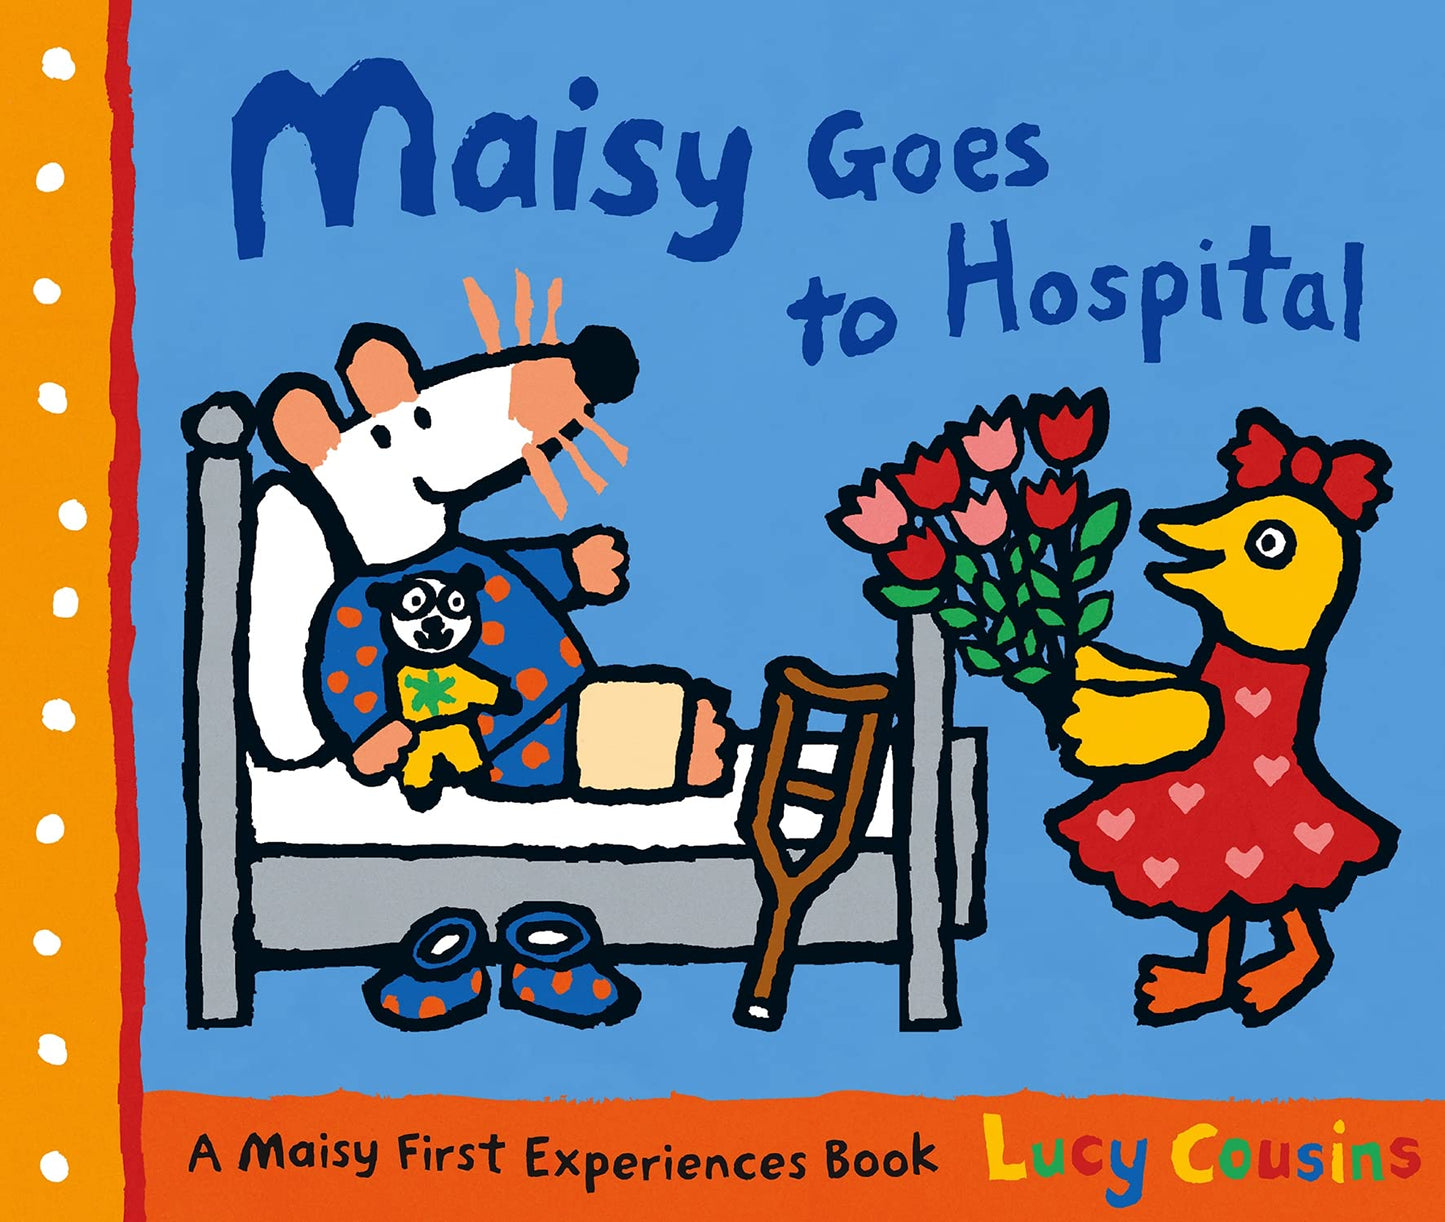 Maisy Goes to Hospital - A Maisy First Experiences Book by Lucy Cousins